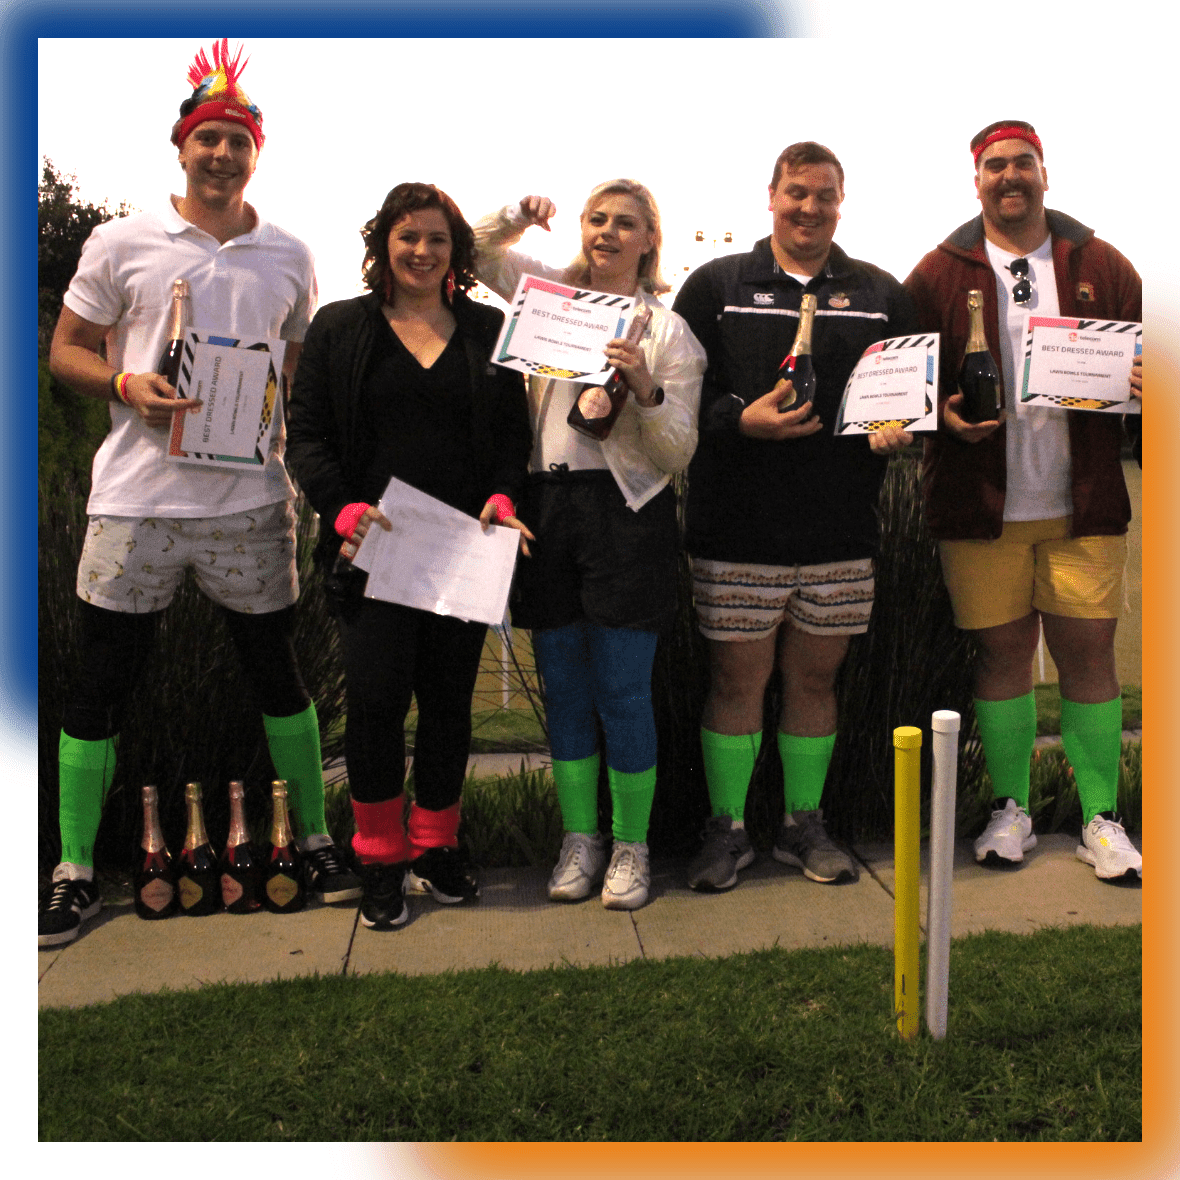  DSL Telecom's best dressed team for for the 80s- themed mid year event.